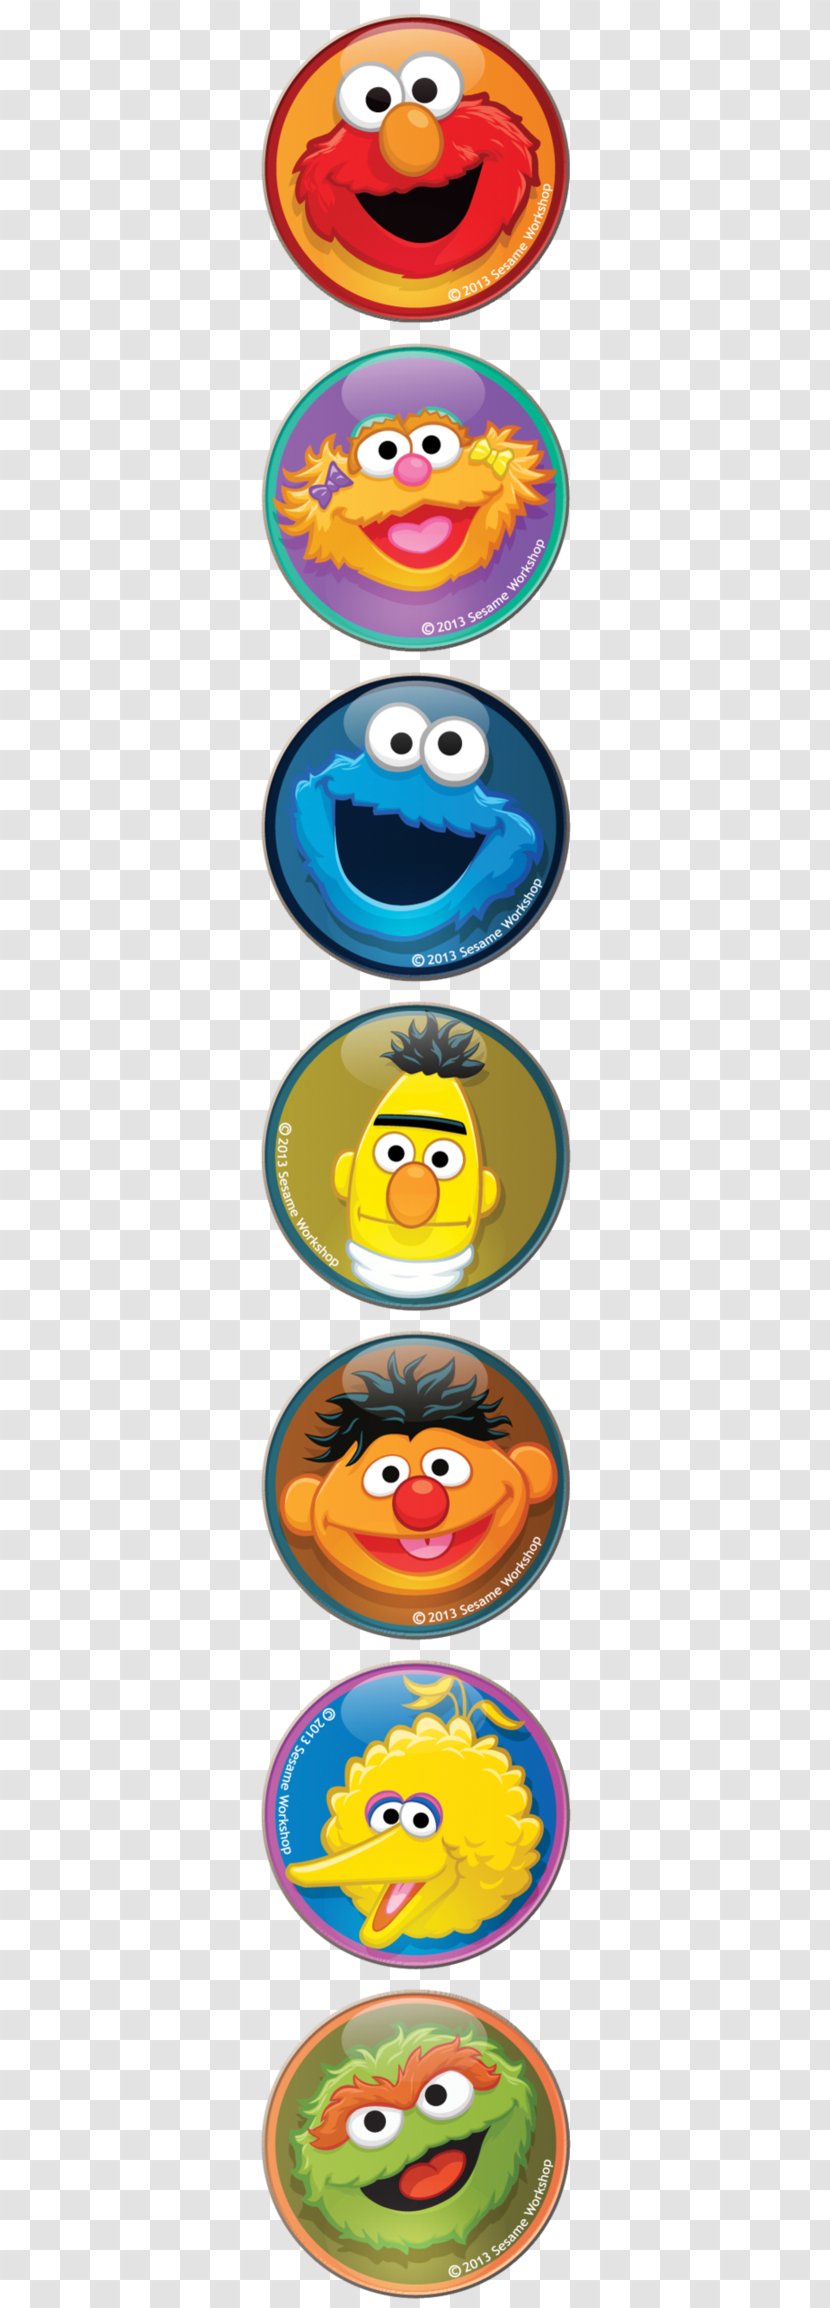 Cookie Monster Elmo Sesame Street Characters Oscar The Grouch - Material - Character Transparent PNG